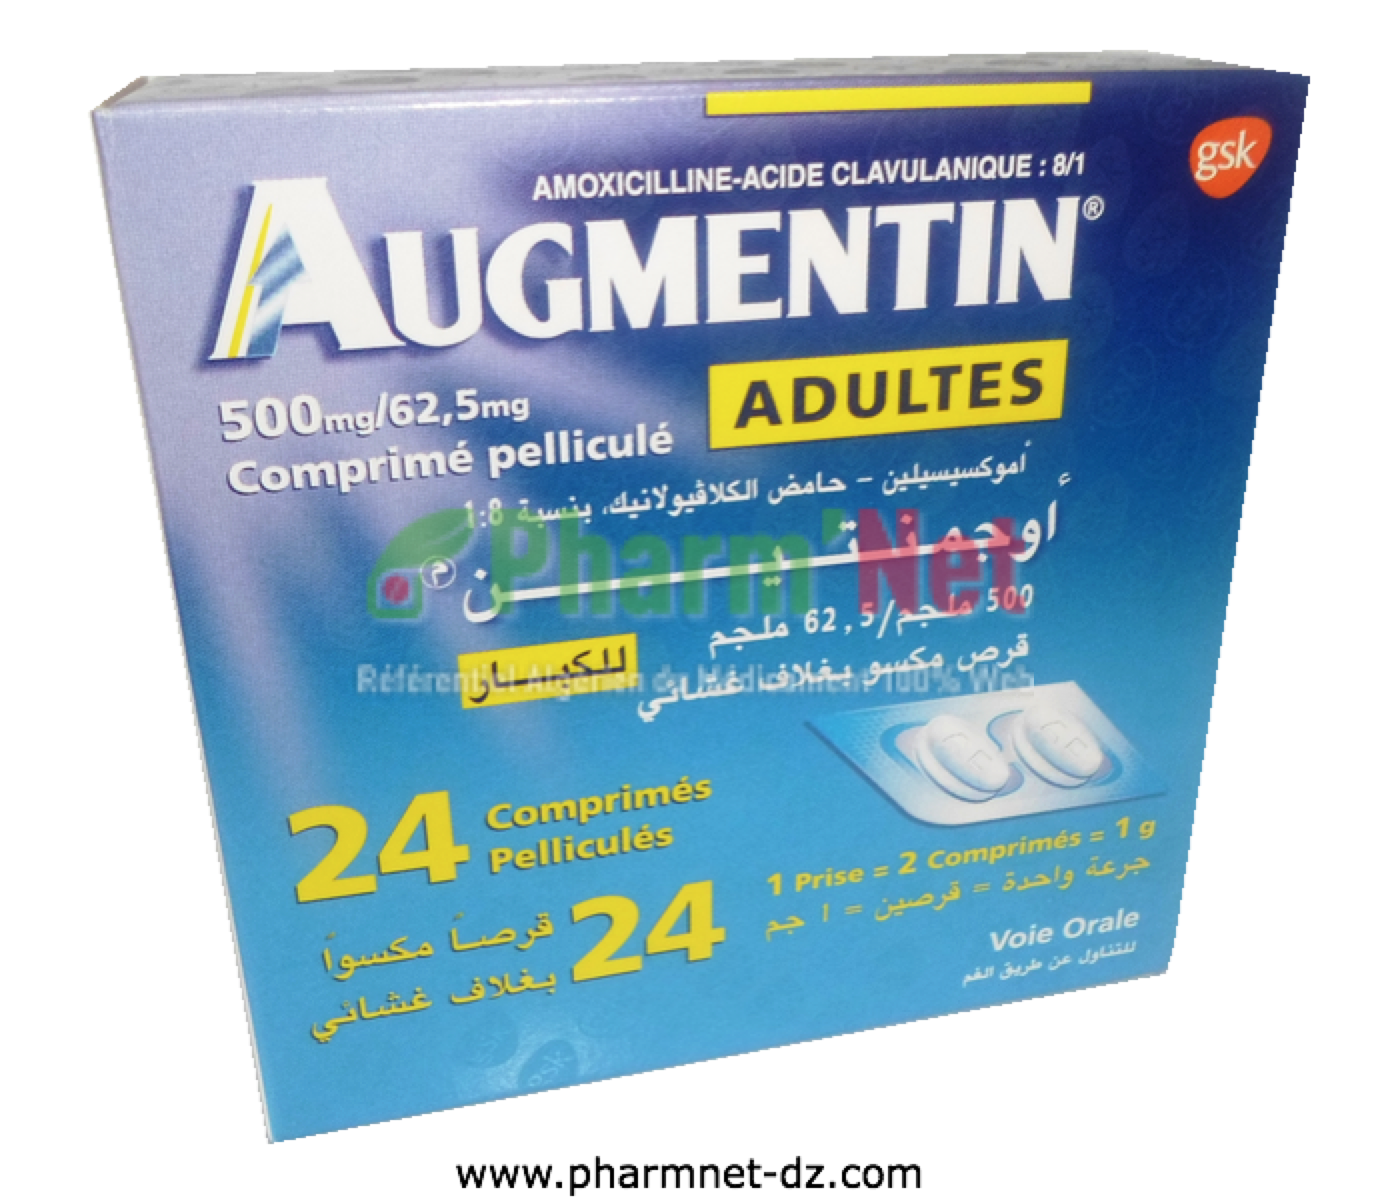 Can i buy ivermectin over the counter uk